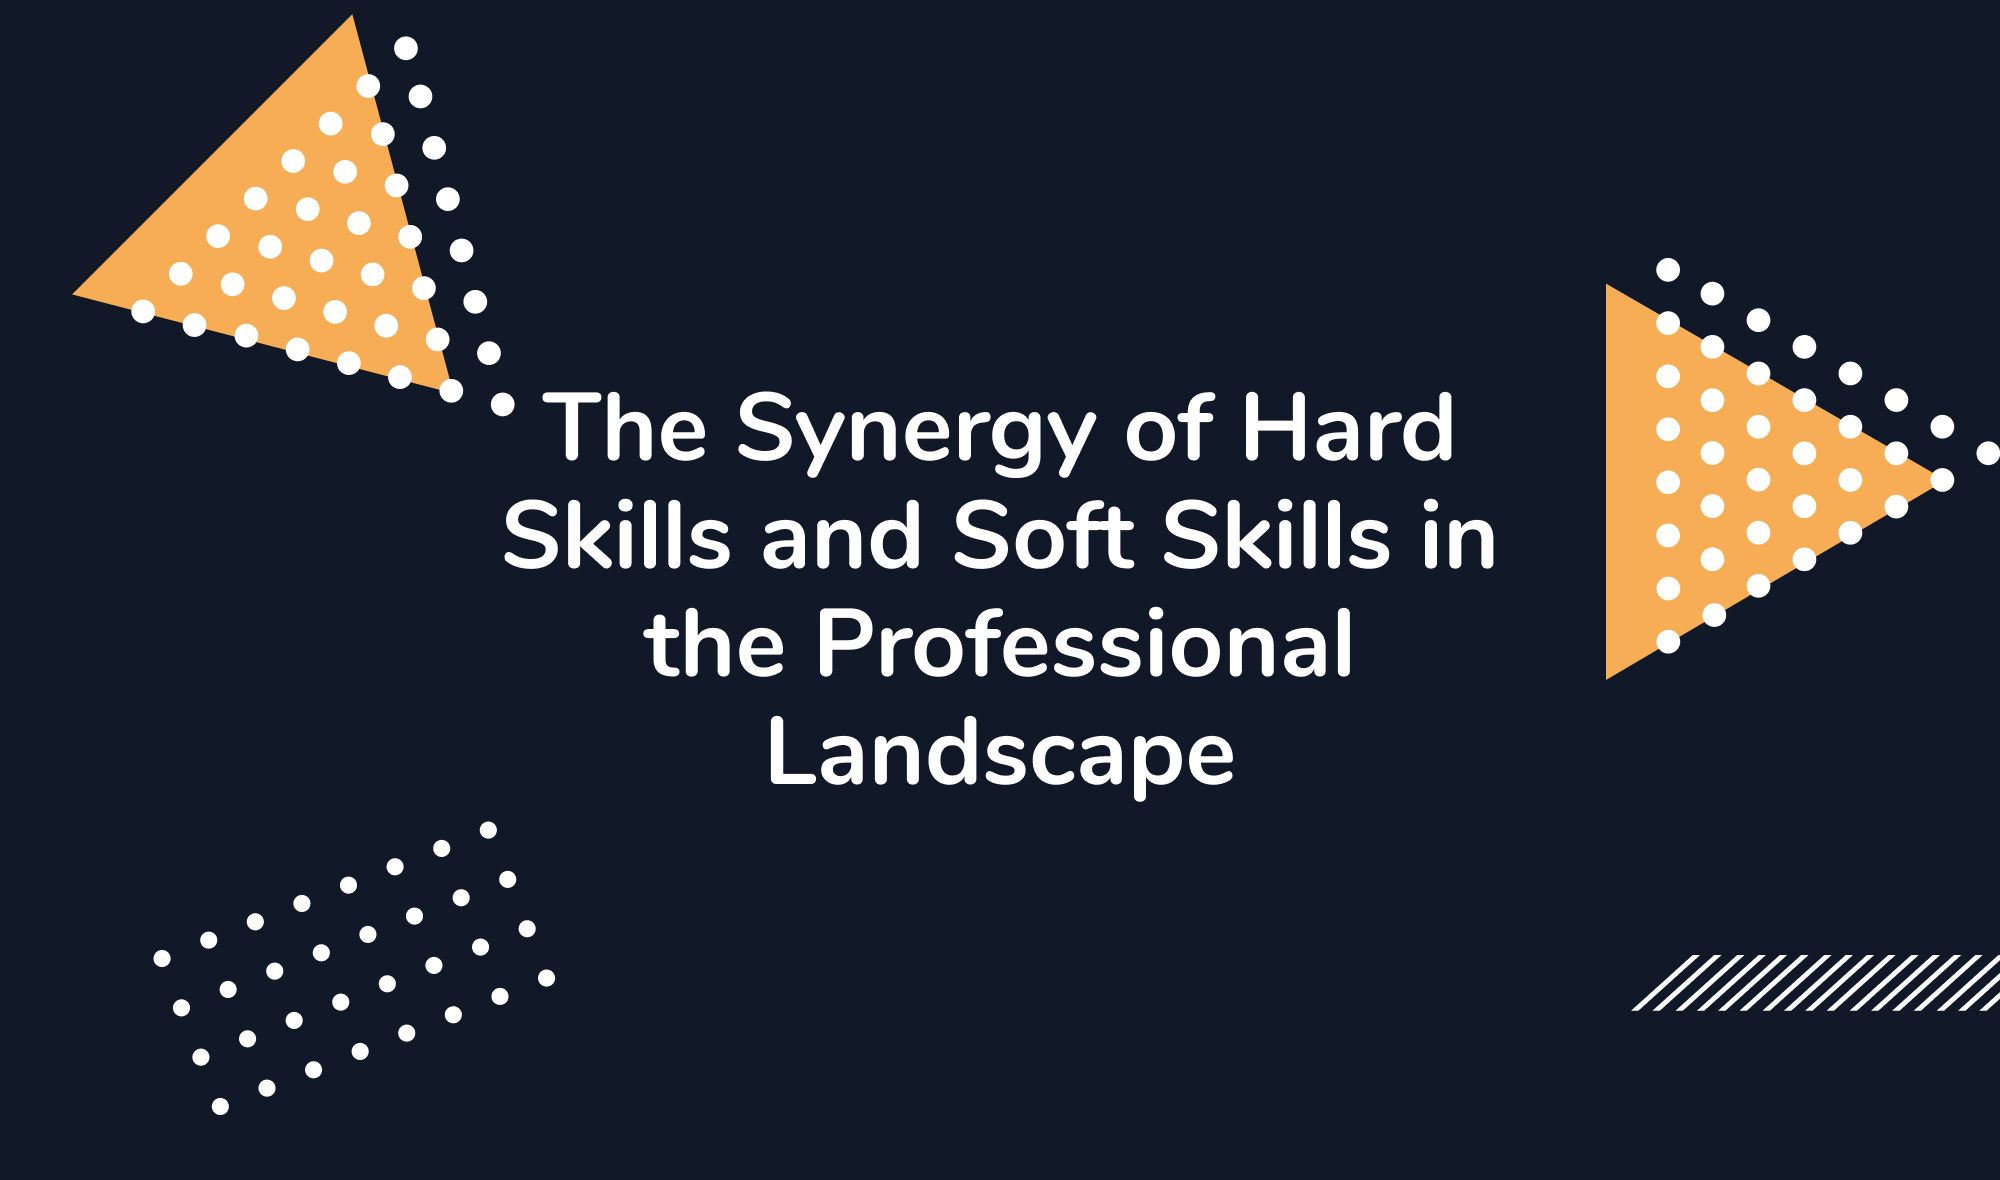 The Synergy of Hard Skills and Soft Skills in the Professional Landscape